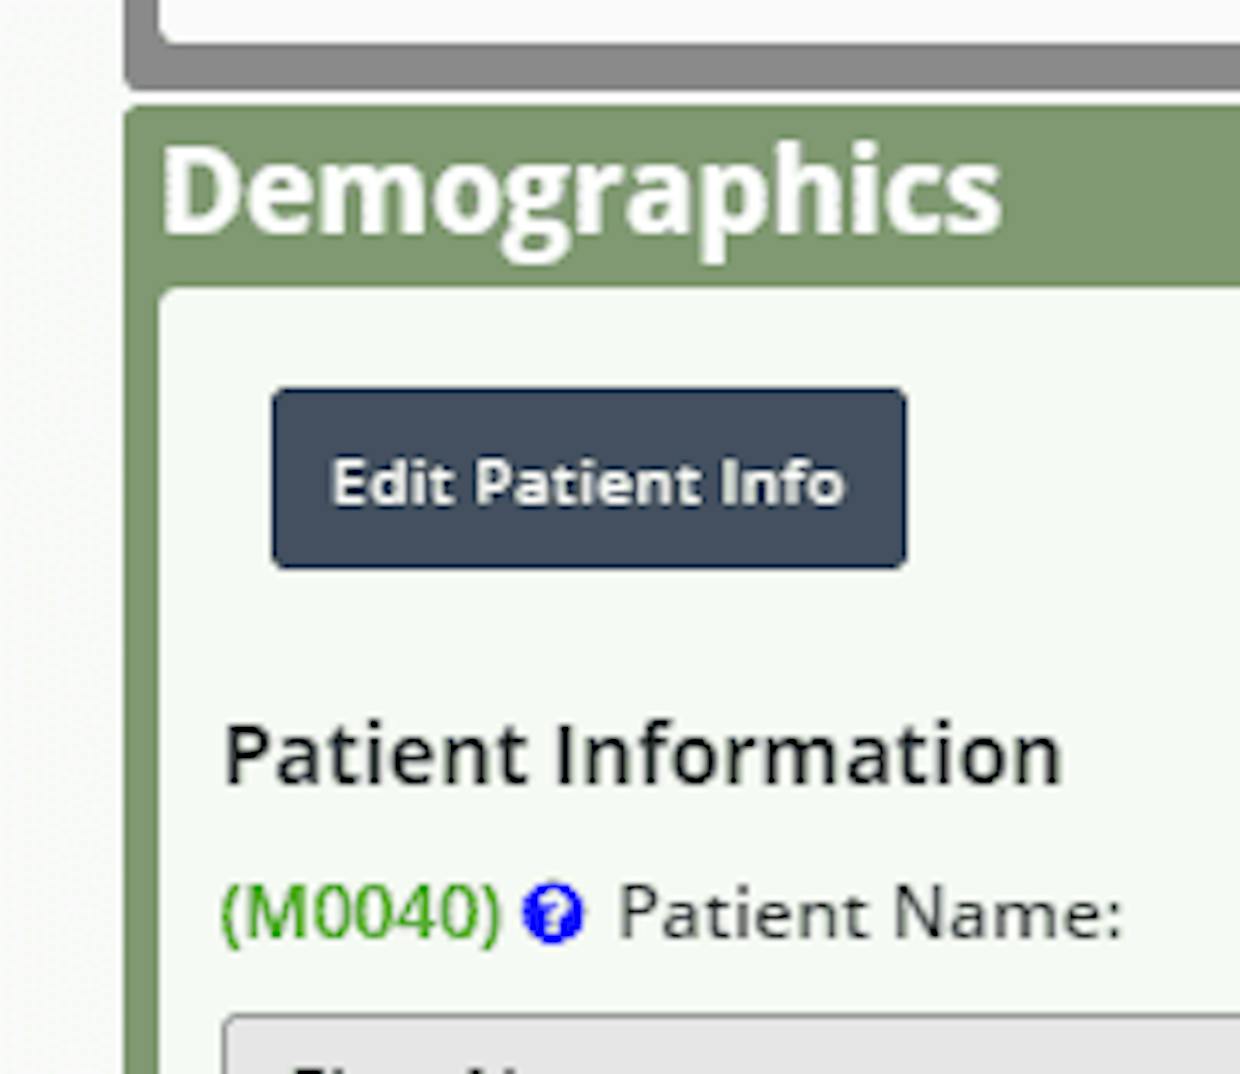 I have a patient that DID have a hospital stay in the last 14 days, but the clinician answered it as no, but there is a hospital discharge date entered further down. I can't get the M1000 question to open so I can make the change. Can someone help me with instructions on how to do that? Thank you,.